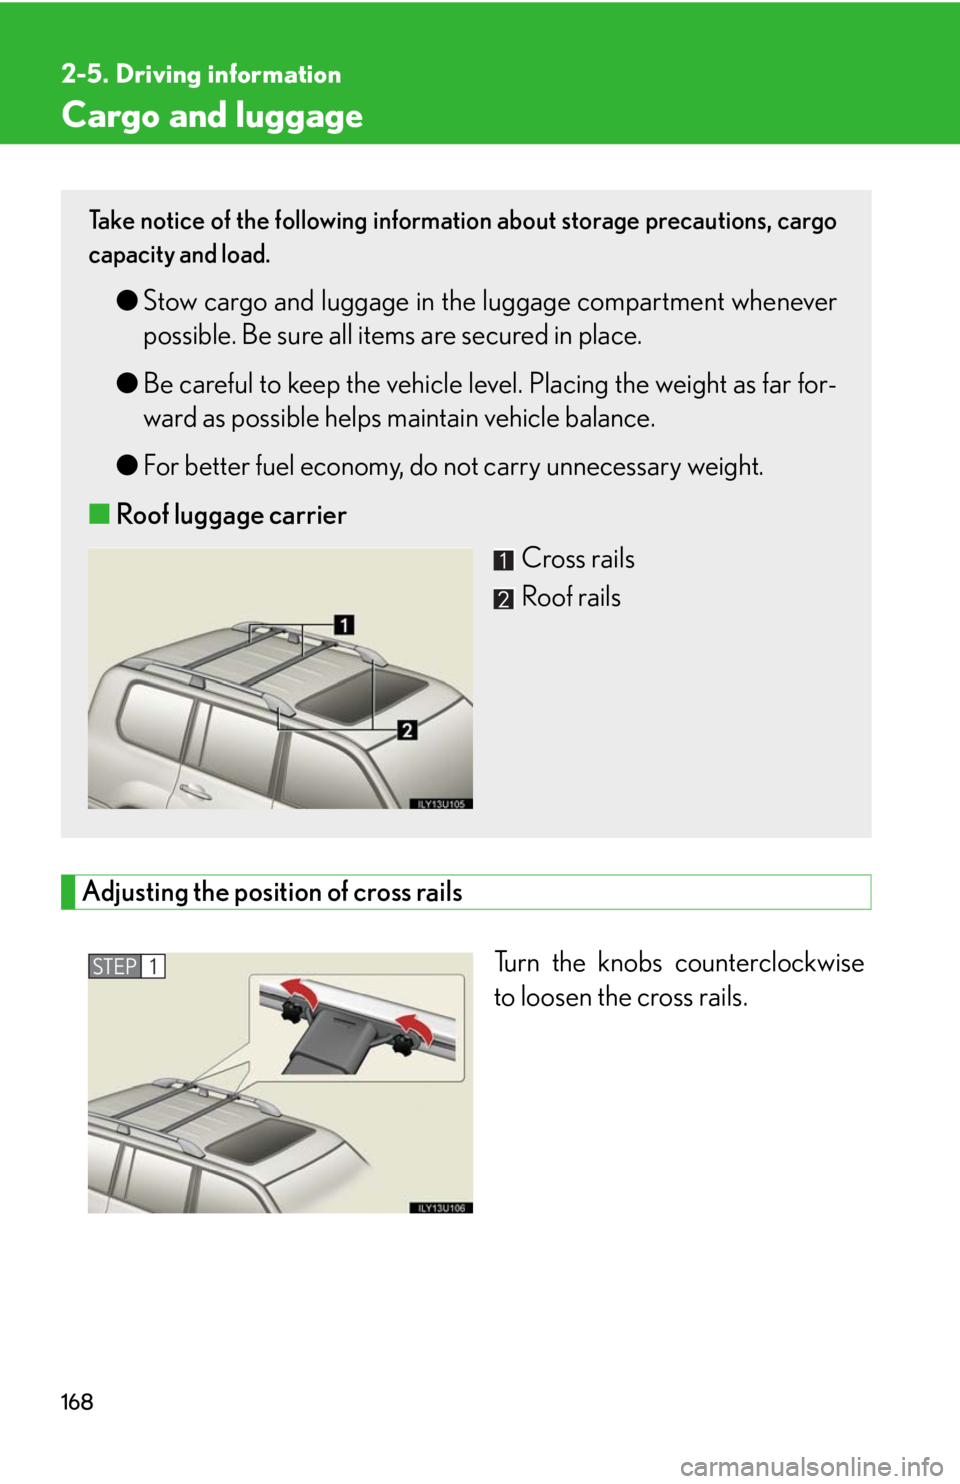 Lexus GX470 2008  Do-it-yourself maintenance / LEXUS 2008 GX470 OWNERS MANUAL (OM60D82U) 168
2-5. Driving information
Cargo and luggage
Adjusting the position of cross railsTurn the knobs counterclockwise
to loosen the cross rails.
Take notice of the following information about storage pr